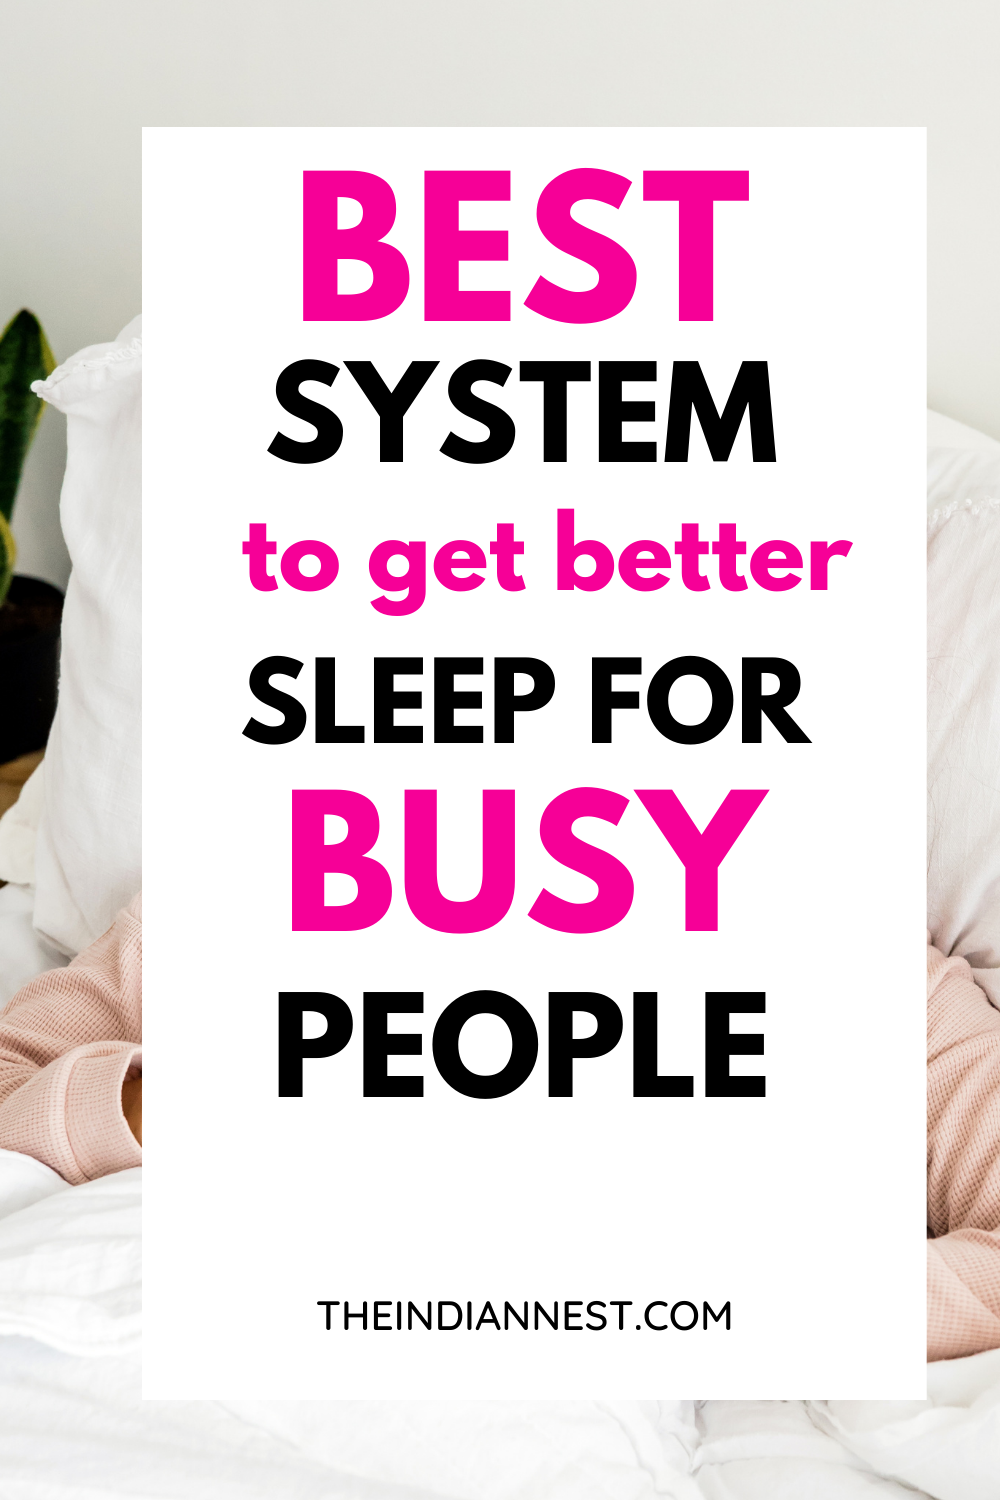 These best system to get better sleep gives you more energy and productive during the day